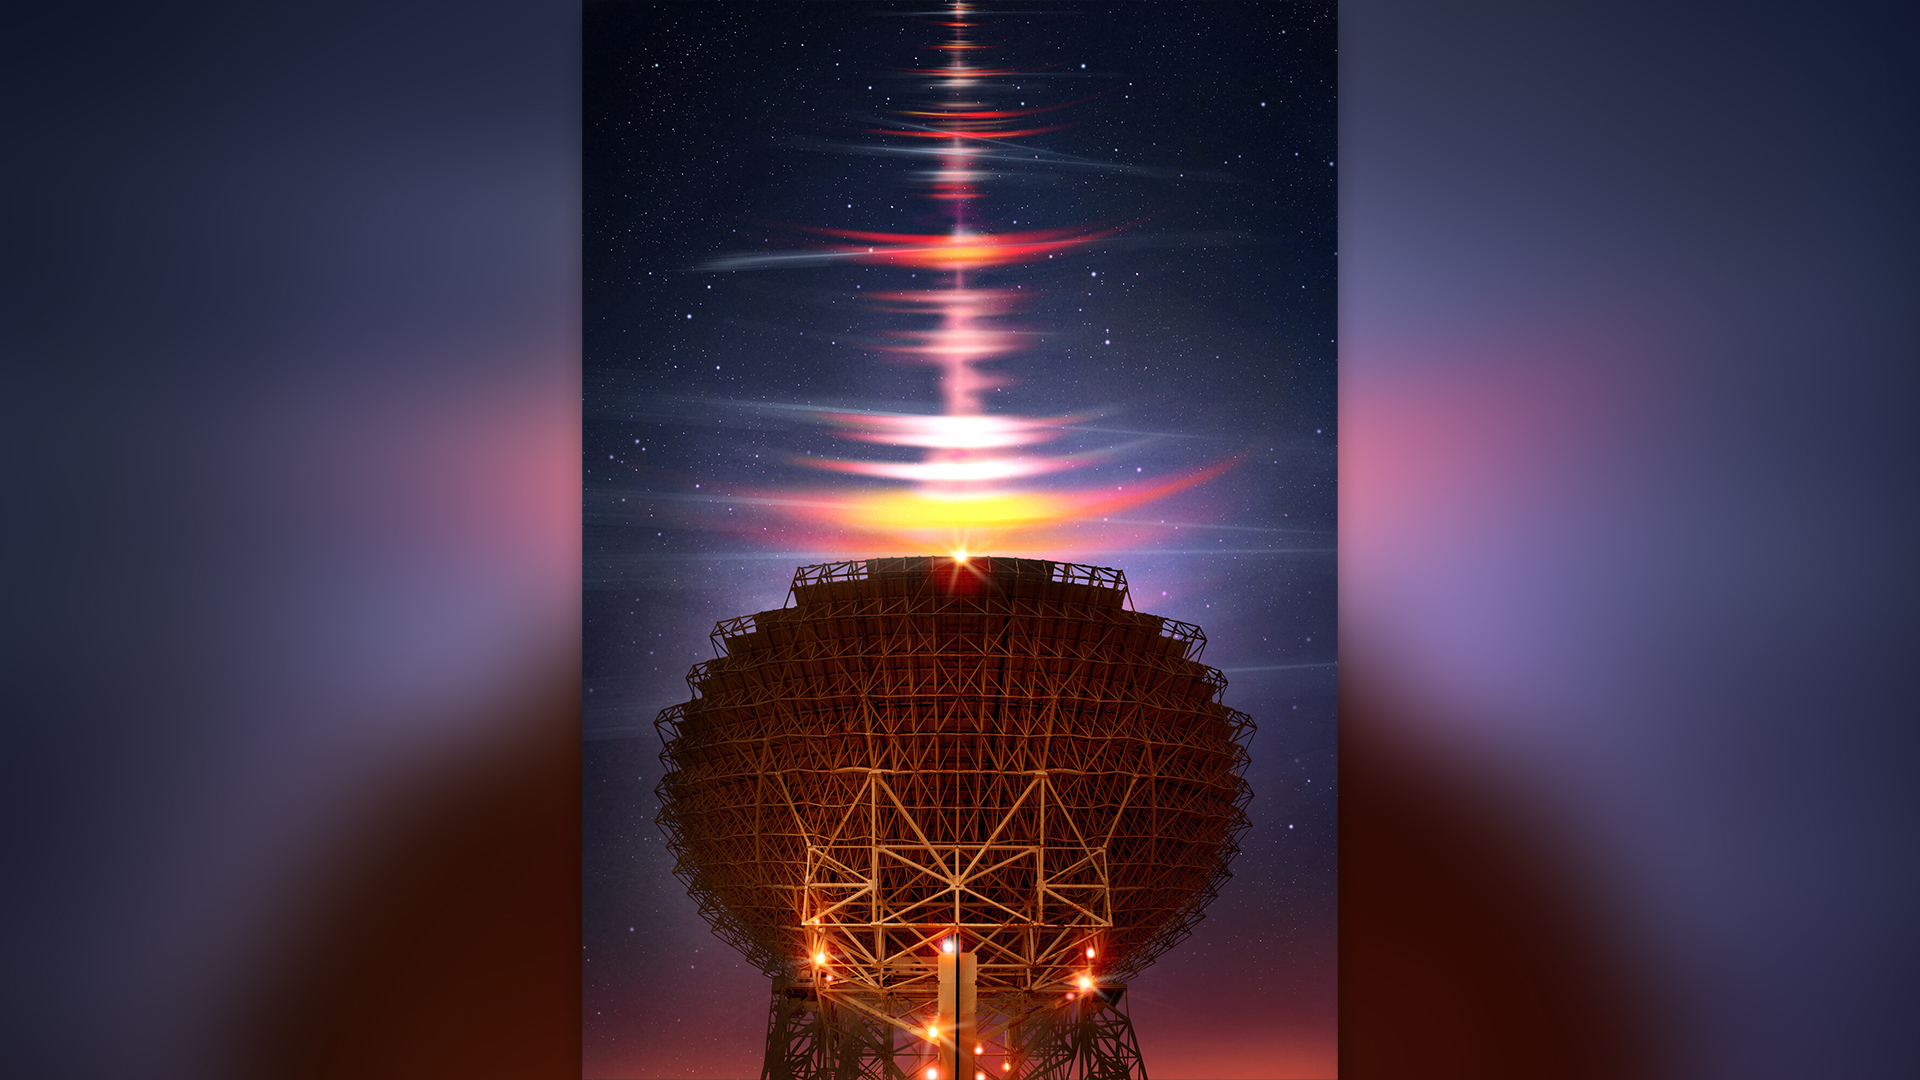 Artist's impression (portrait orientation) of the discovery of microsecond bursts. The foreground shows the Green Bank Telescope (United States) with which the research was done. Incoming radio waves are shown as white, red, and orange streaks that follow each other in rapid succession. The long red streaks are the previously known millisecond flashes.